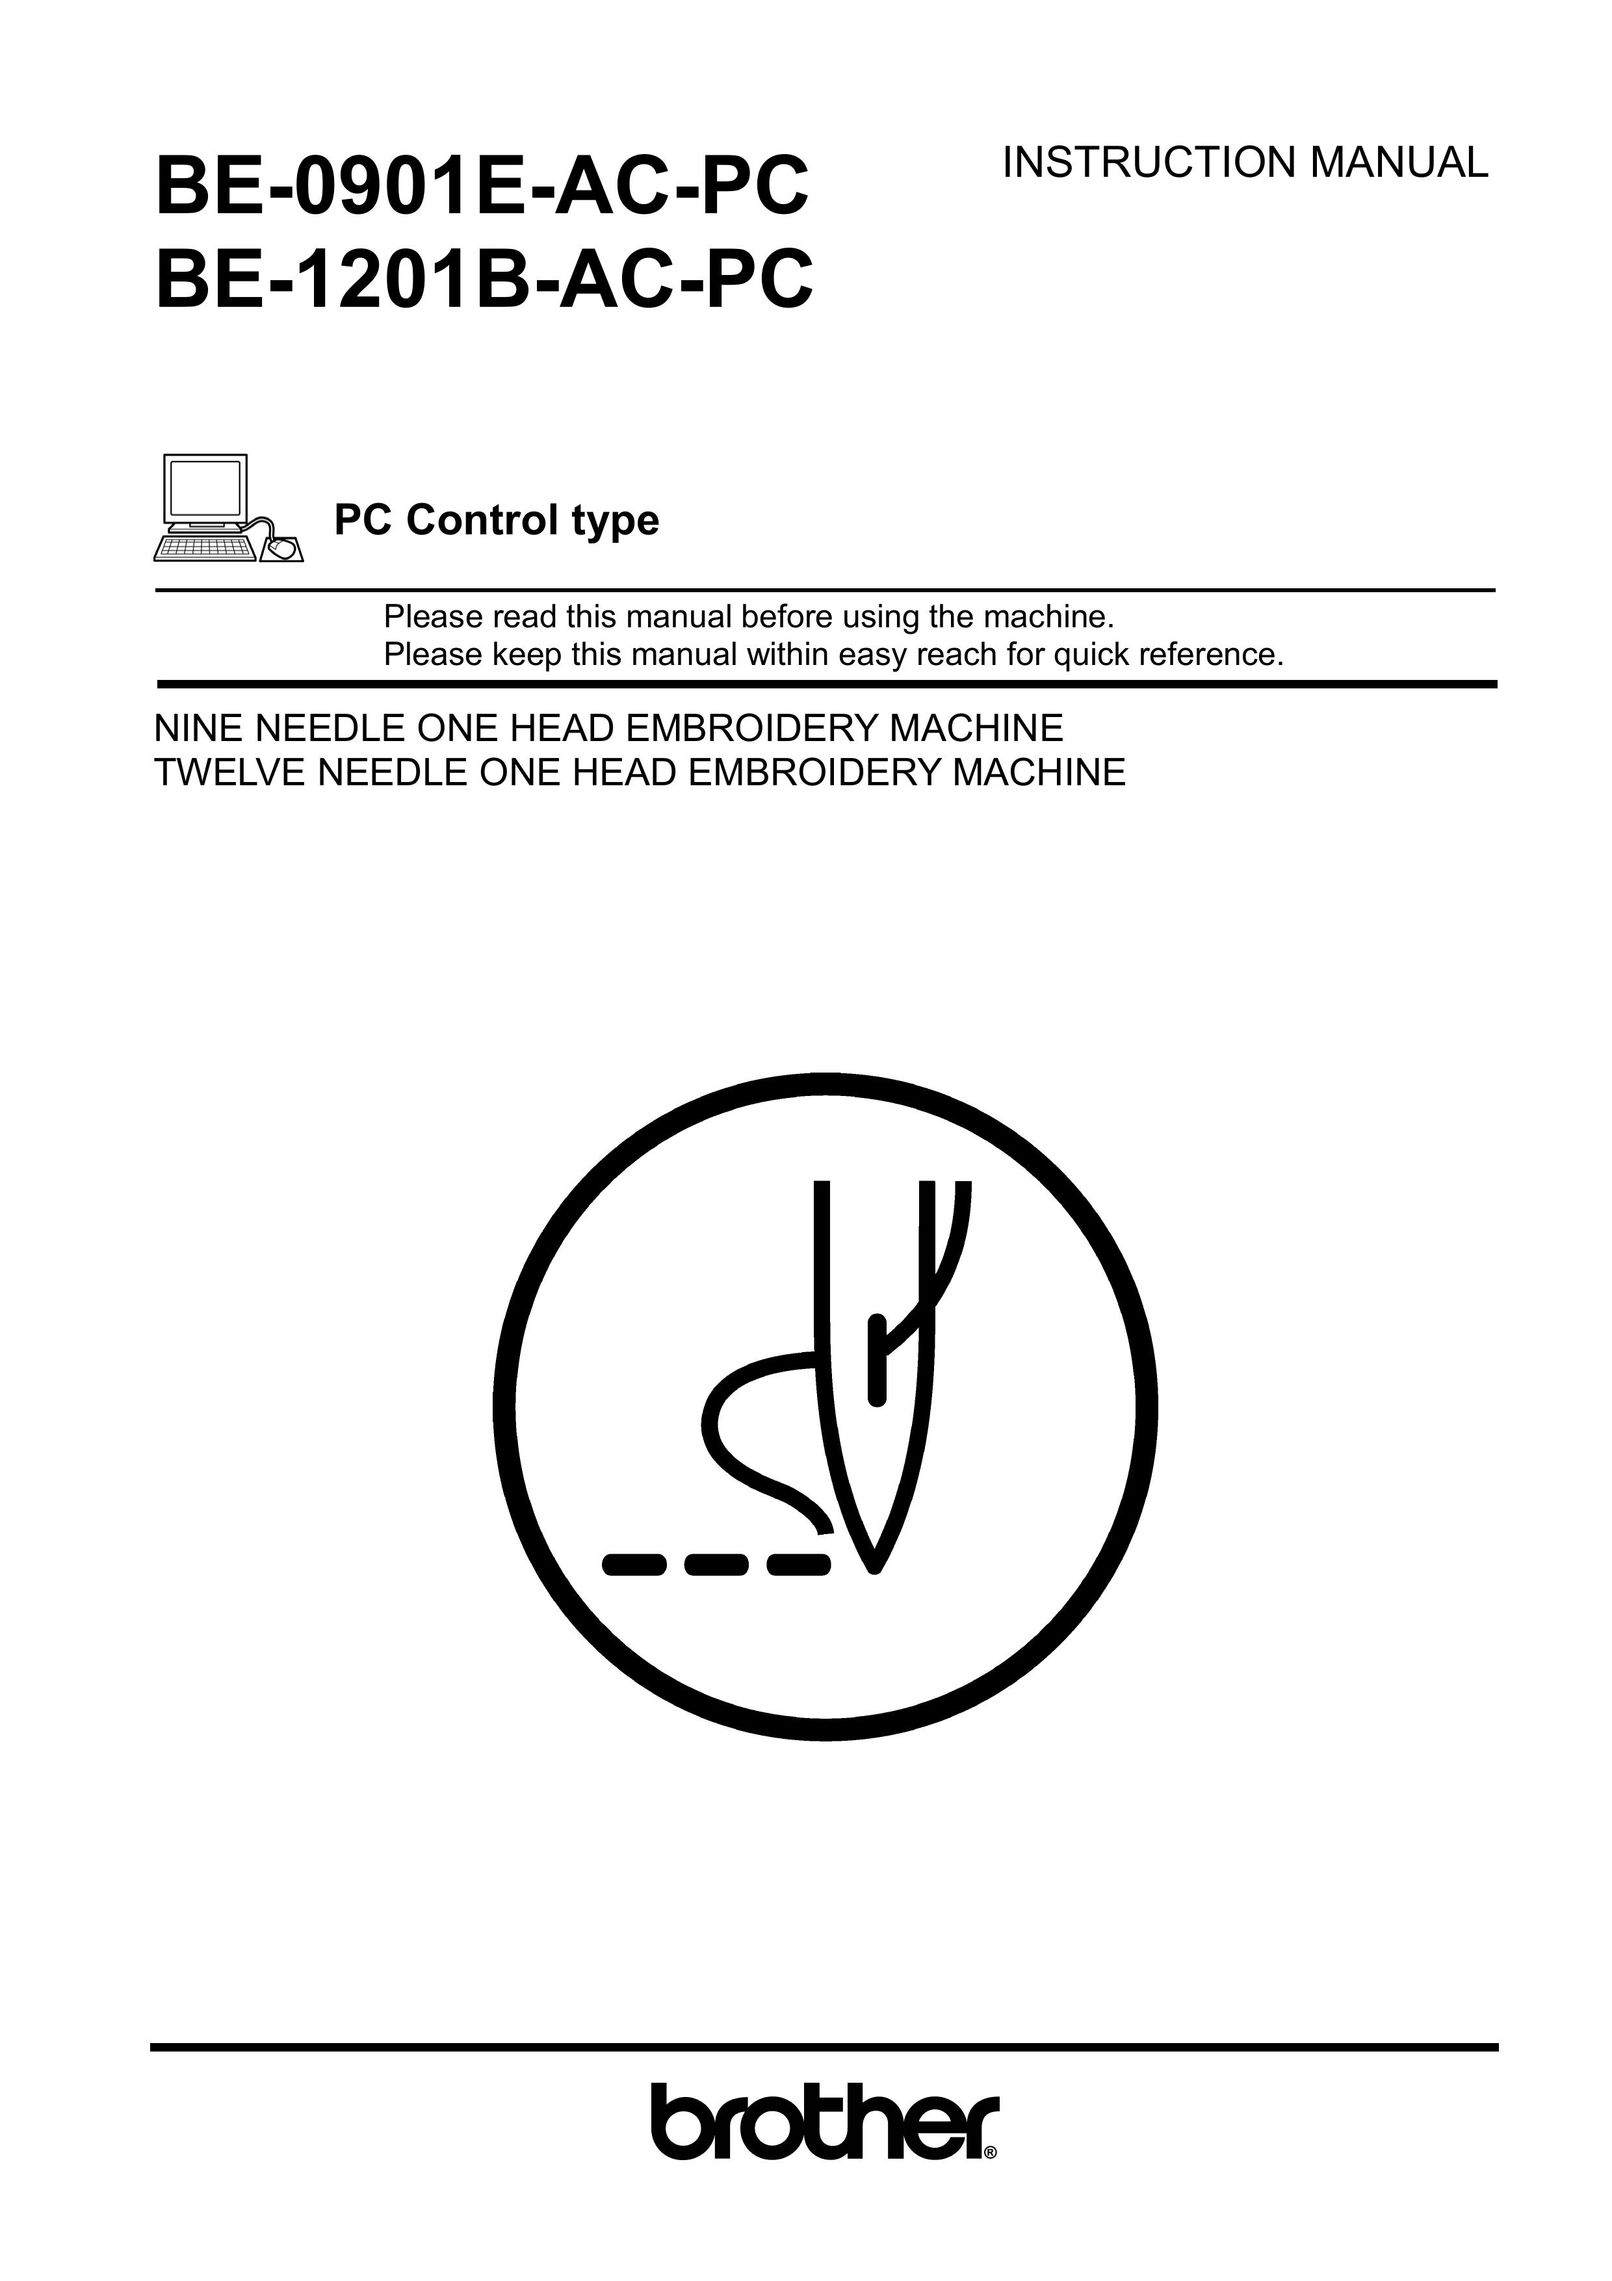 Brother BE-1201B-AC-PC Personal Computer User Manual